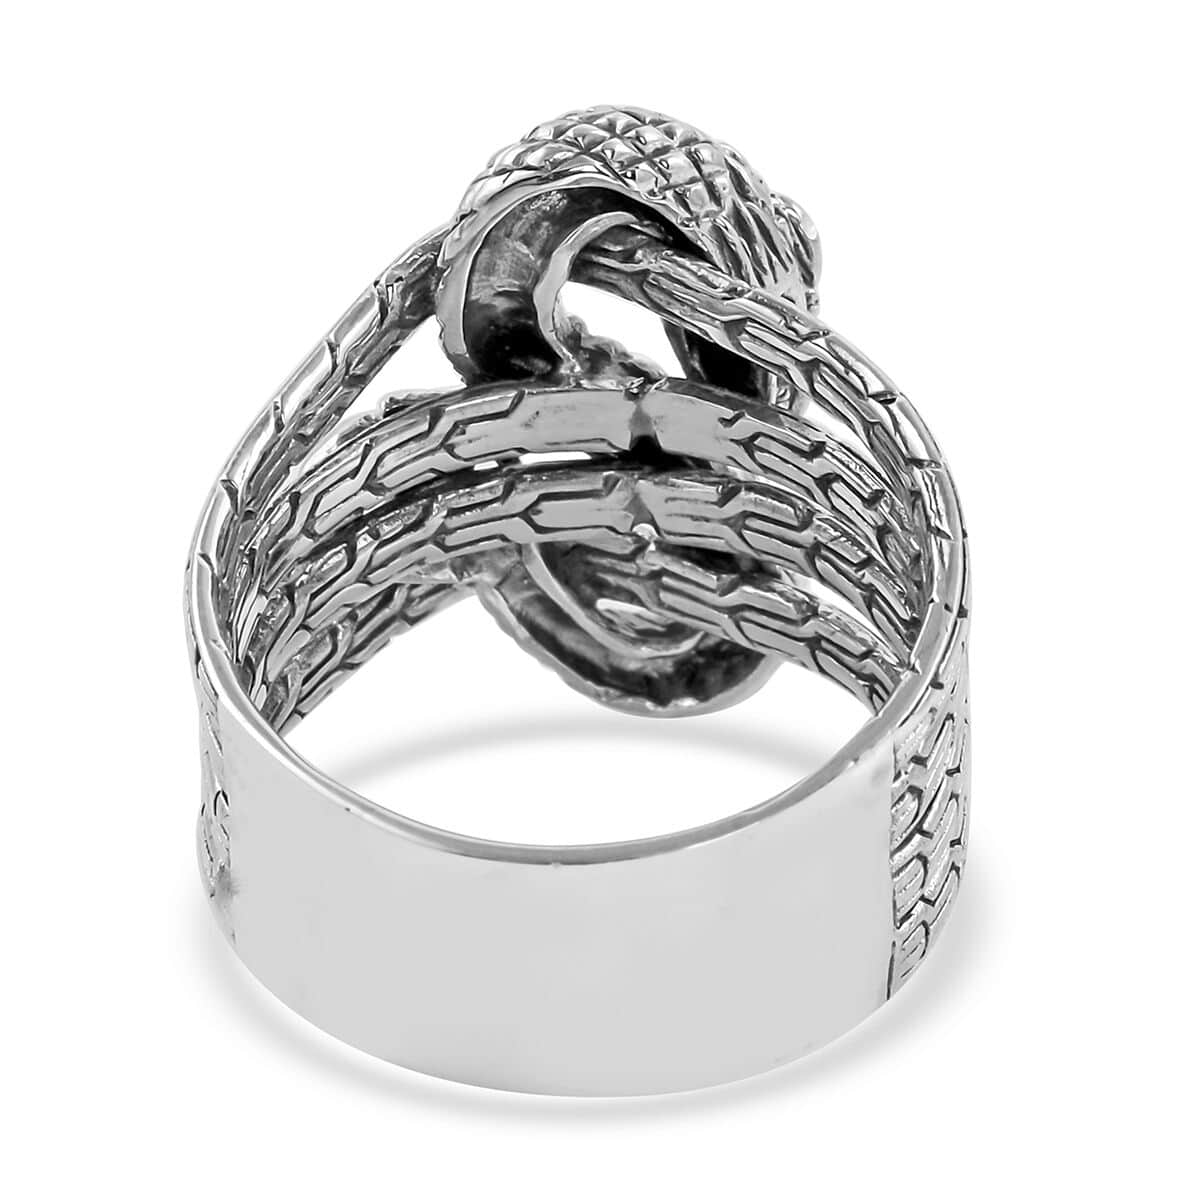 Mother’s Day Gift Bali Legacy Sterling Silver Dragon Ring, Silver Ring, Creature Ring, Silver Jewelry, Gifts For Her, Birthday Gifts 8.45 Grams (Size 9) image number 4